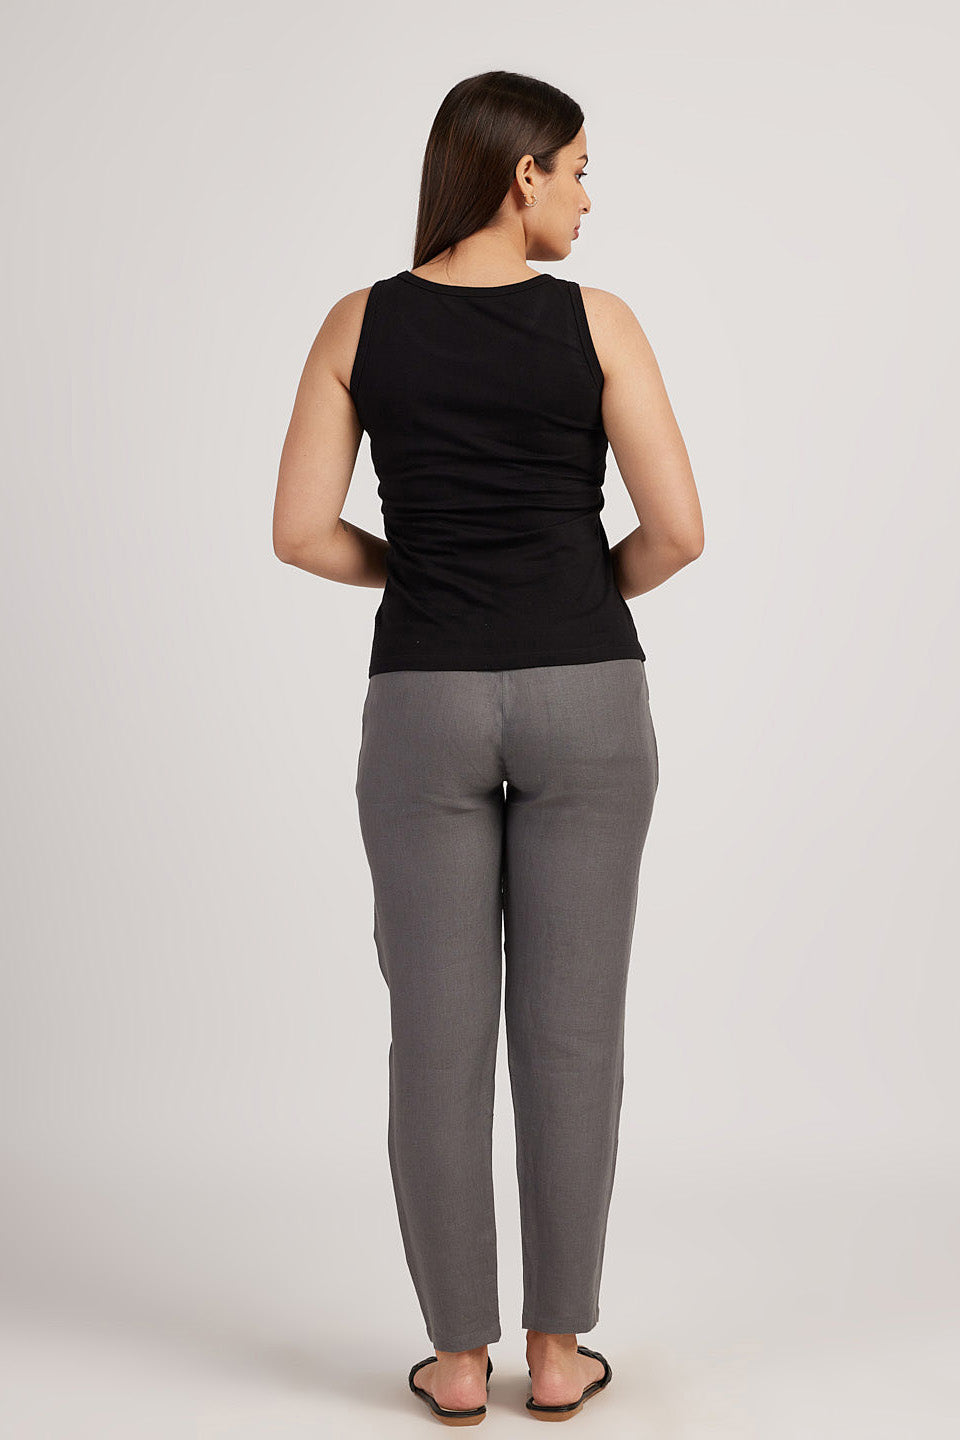 Trousers for Women - The Linen Pleated Trousers Slate Grey